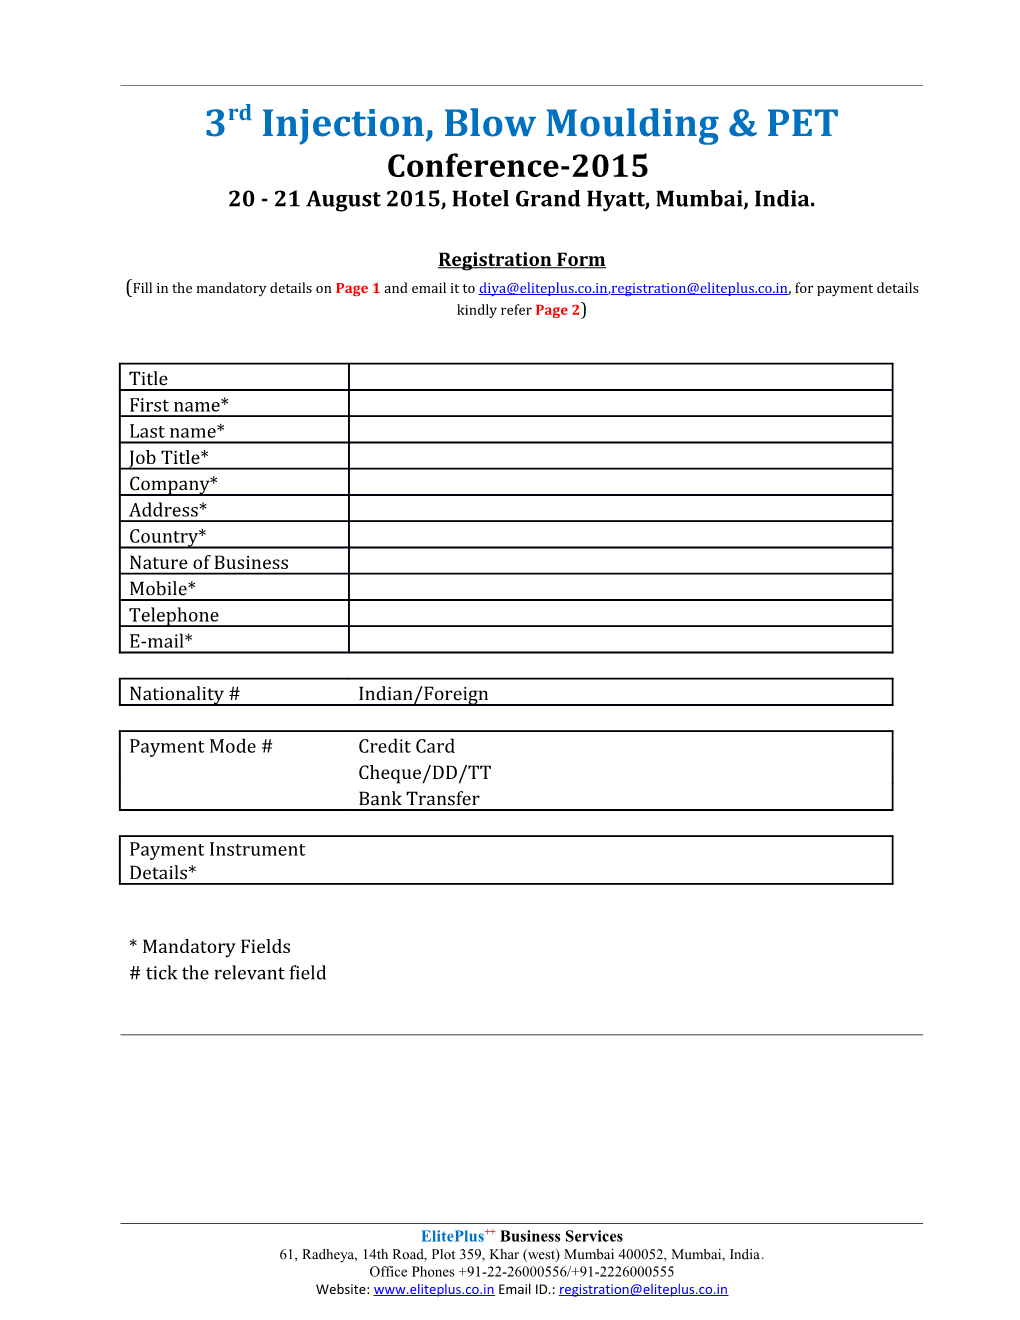 3Rd Injection, Blow Moulding & PET Conference-2015